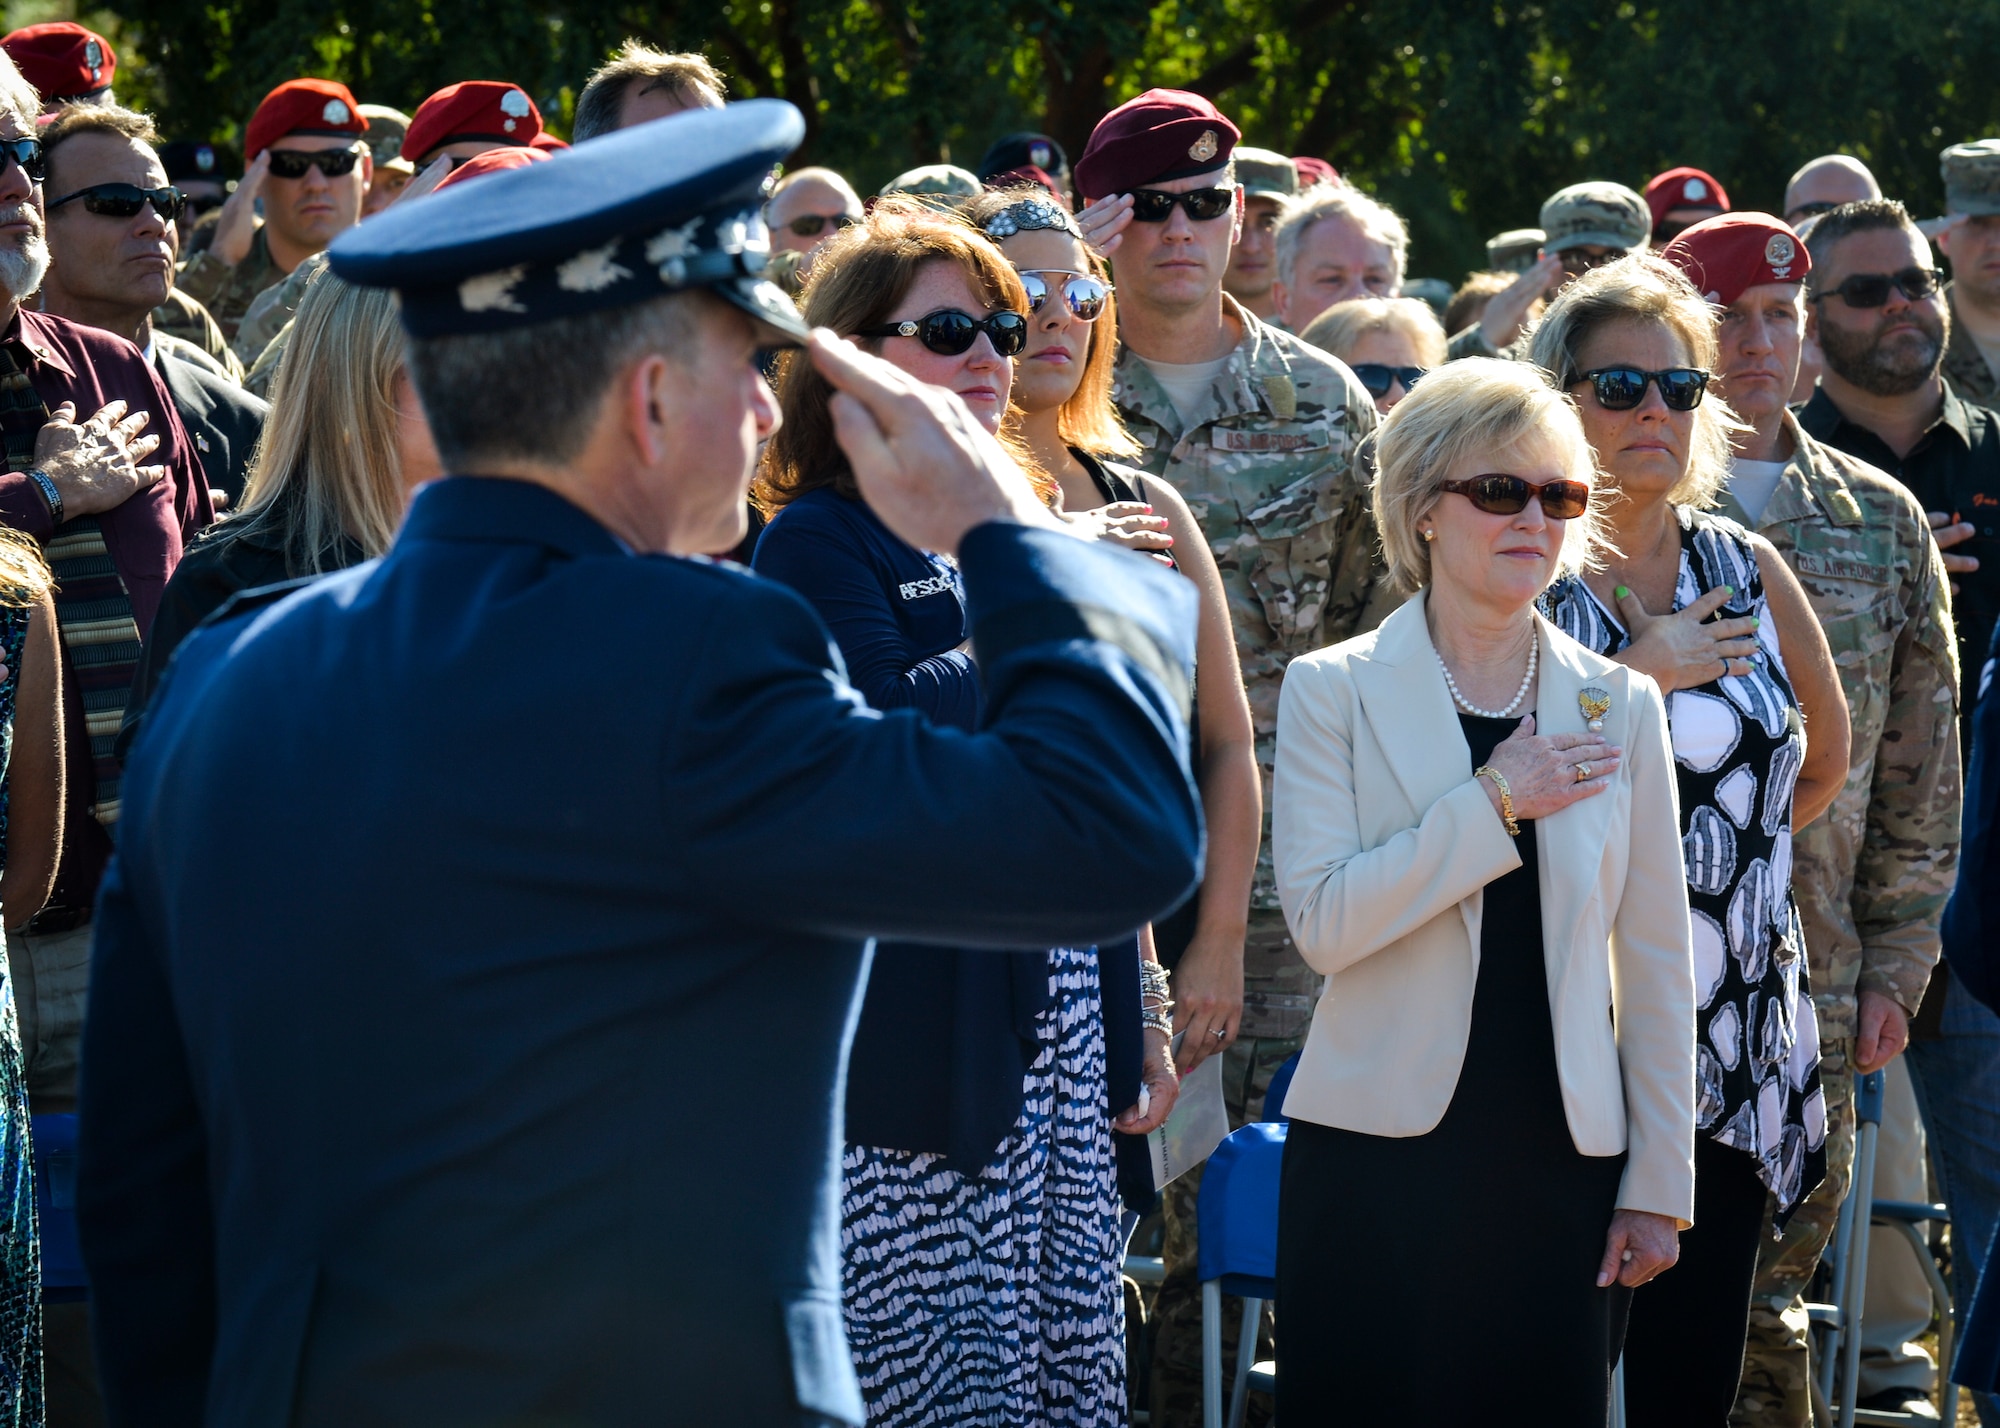 Dawn Goldfein, wife of Air Force Chief of Staff David L. Goldfein, places her hand over her heart as the national anthem is performed during the Special Tactics Memorial dedication ceremony at Hurlburt Field, Fla., Oct. 20, 2016. During her visit, Dawn also met with AFSOC spouses, Airman and Family Readiness Center personnel, and received a Preservation of the Force and Family presentation. (U.S. Air Force photo by Senior Airman Andrea Posey)